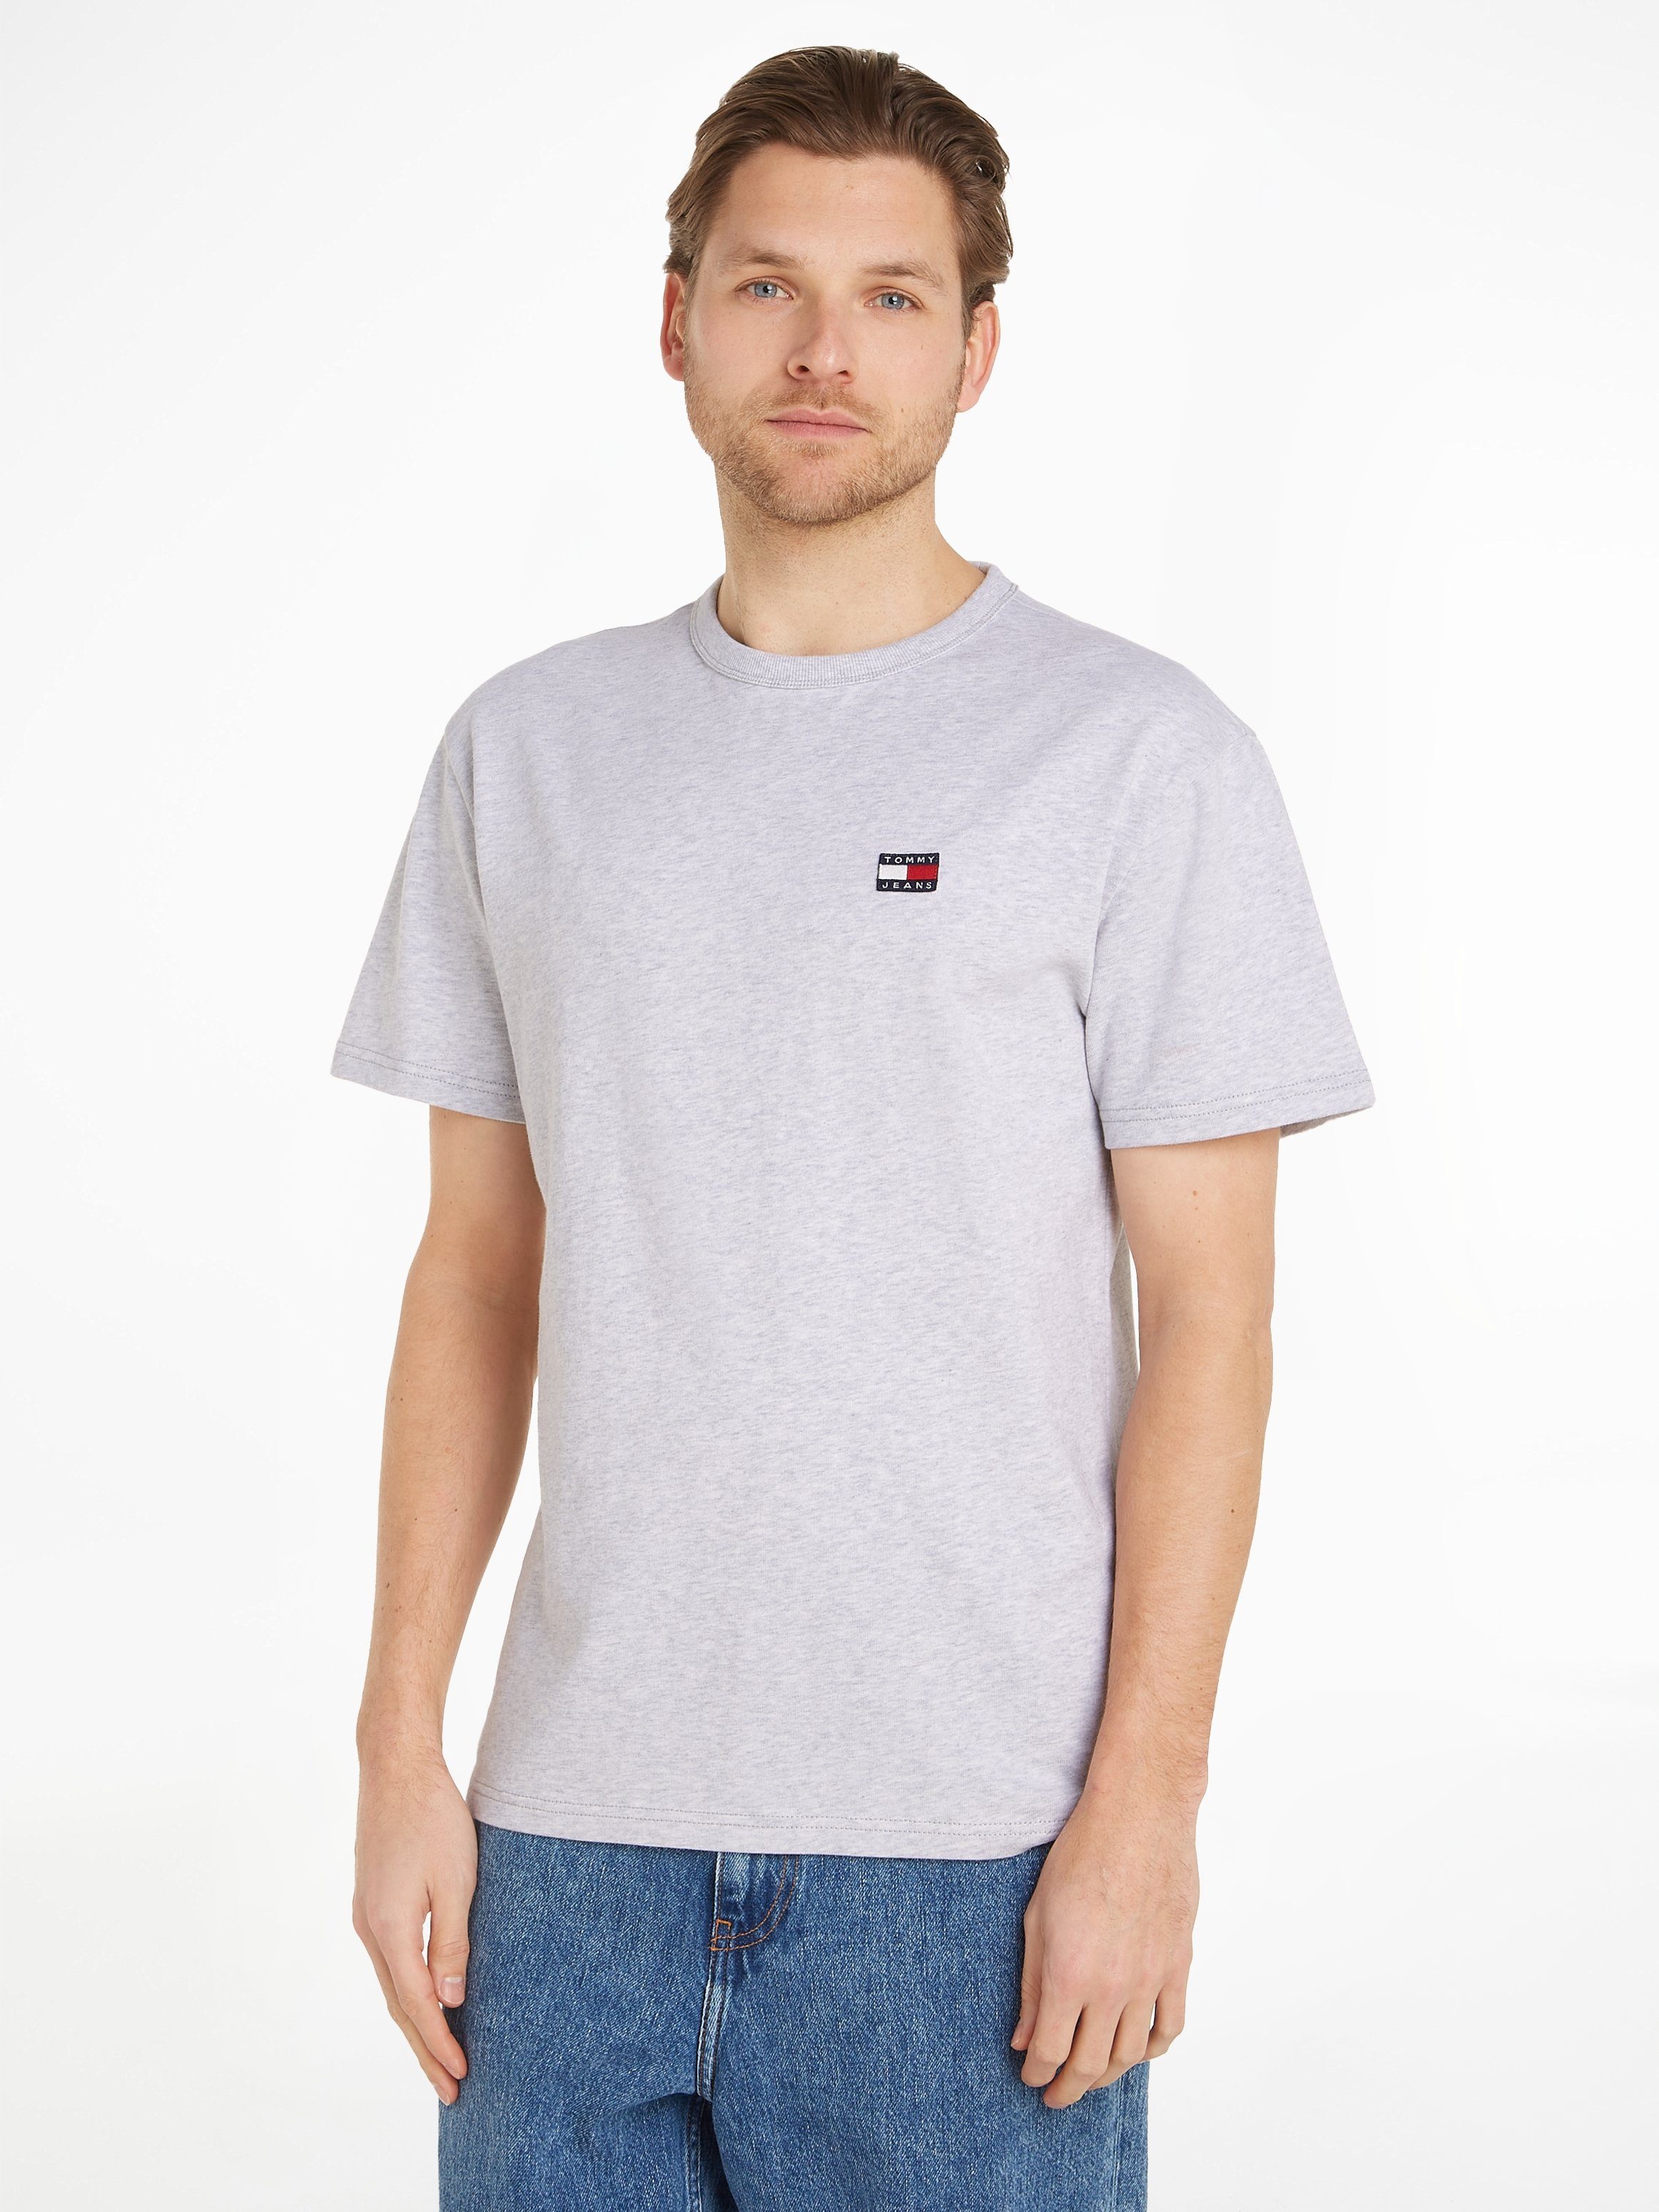 XS T-Shirt Jeans TJM TEE Silver CLSC TOMMY Tommy Grey BADGE